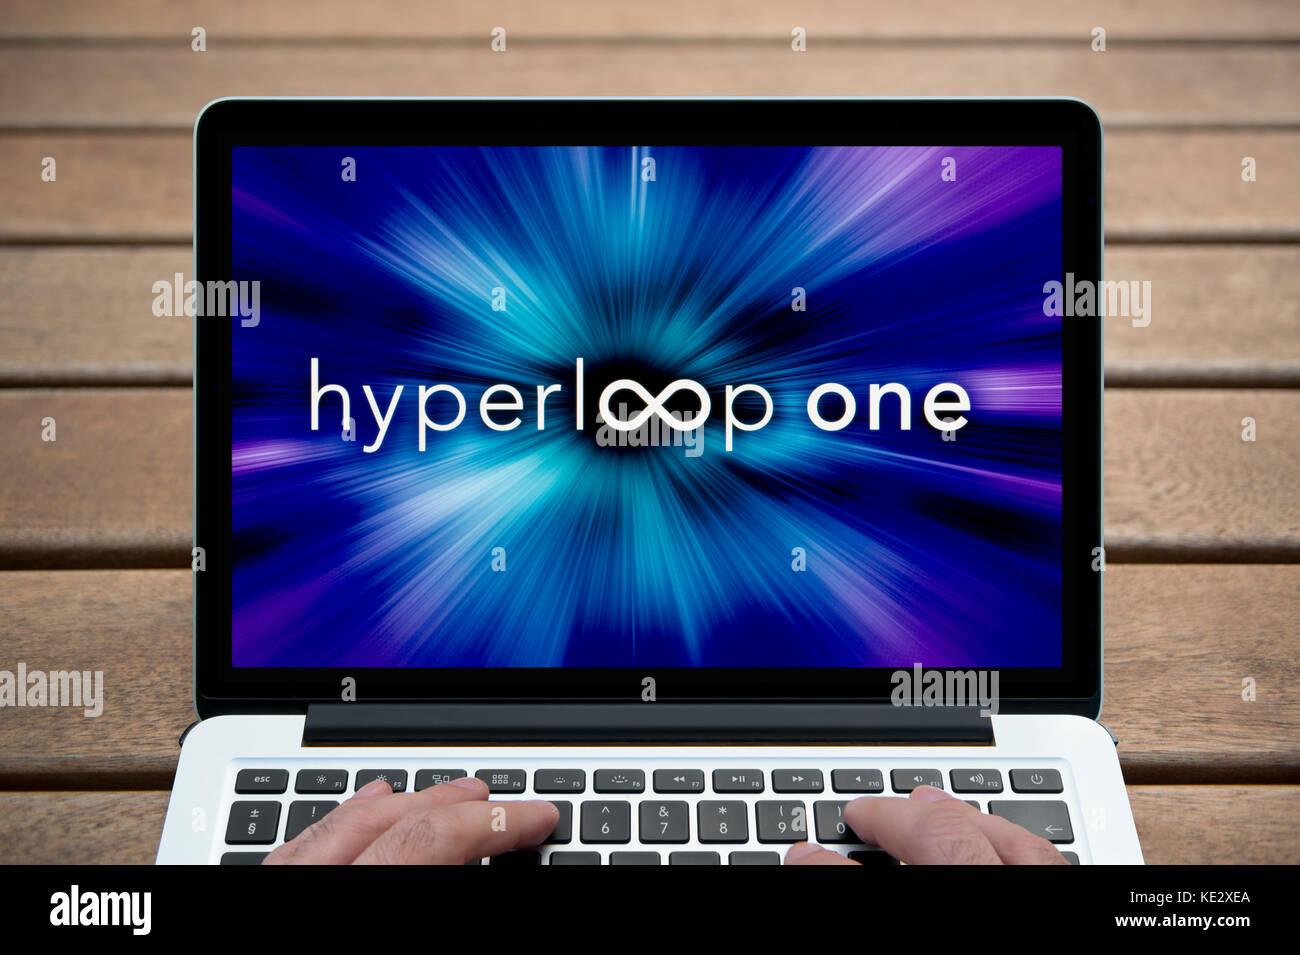 The Hyperloop One logo is shown on the screen of a MacBook Pro laptop, shot against a wooden bench including a man's fingers (Editorial only). Stock Photo